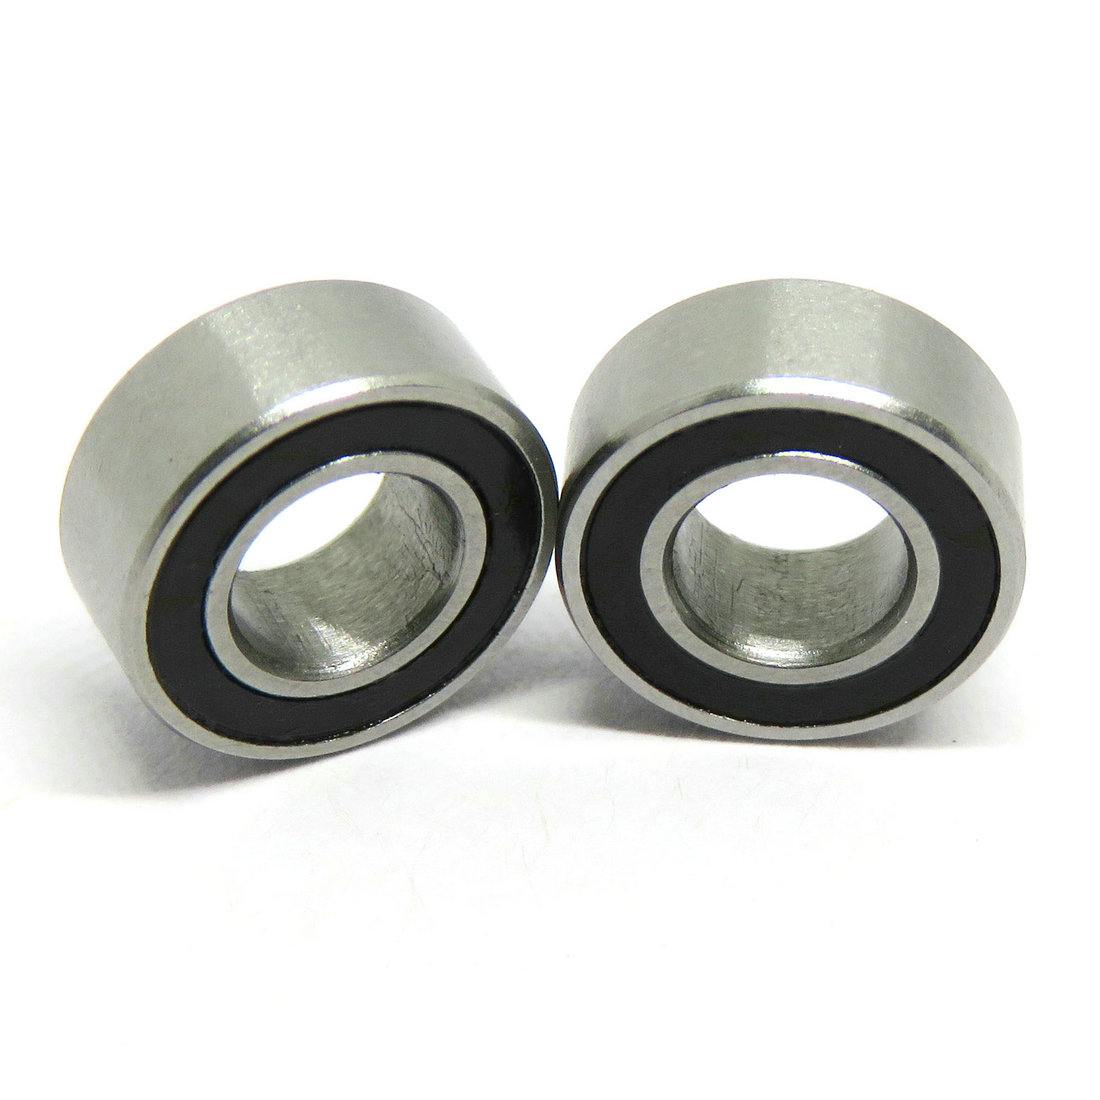 MR74RS Bearing ABEC-3 4x7x2.5 mm Miniature MR74-2RS Ball Bearings RS MR74 2RS With Blue Sealed L-740D.jpg